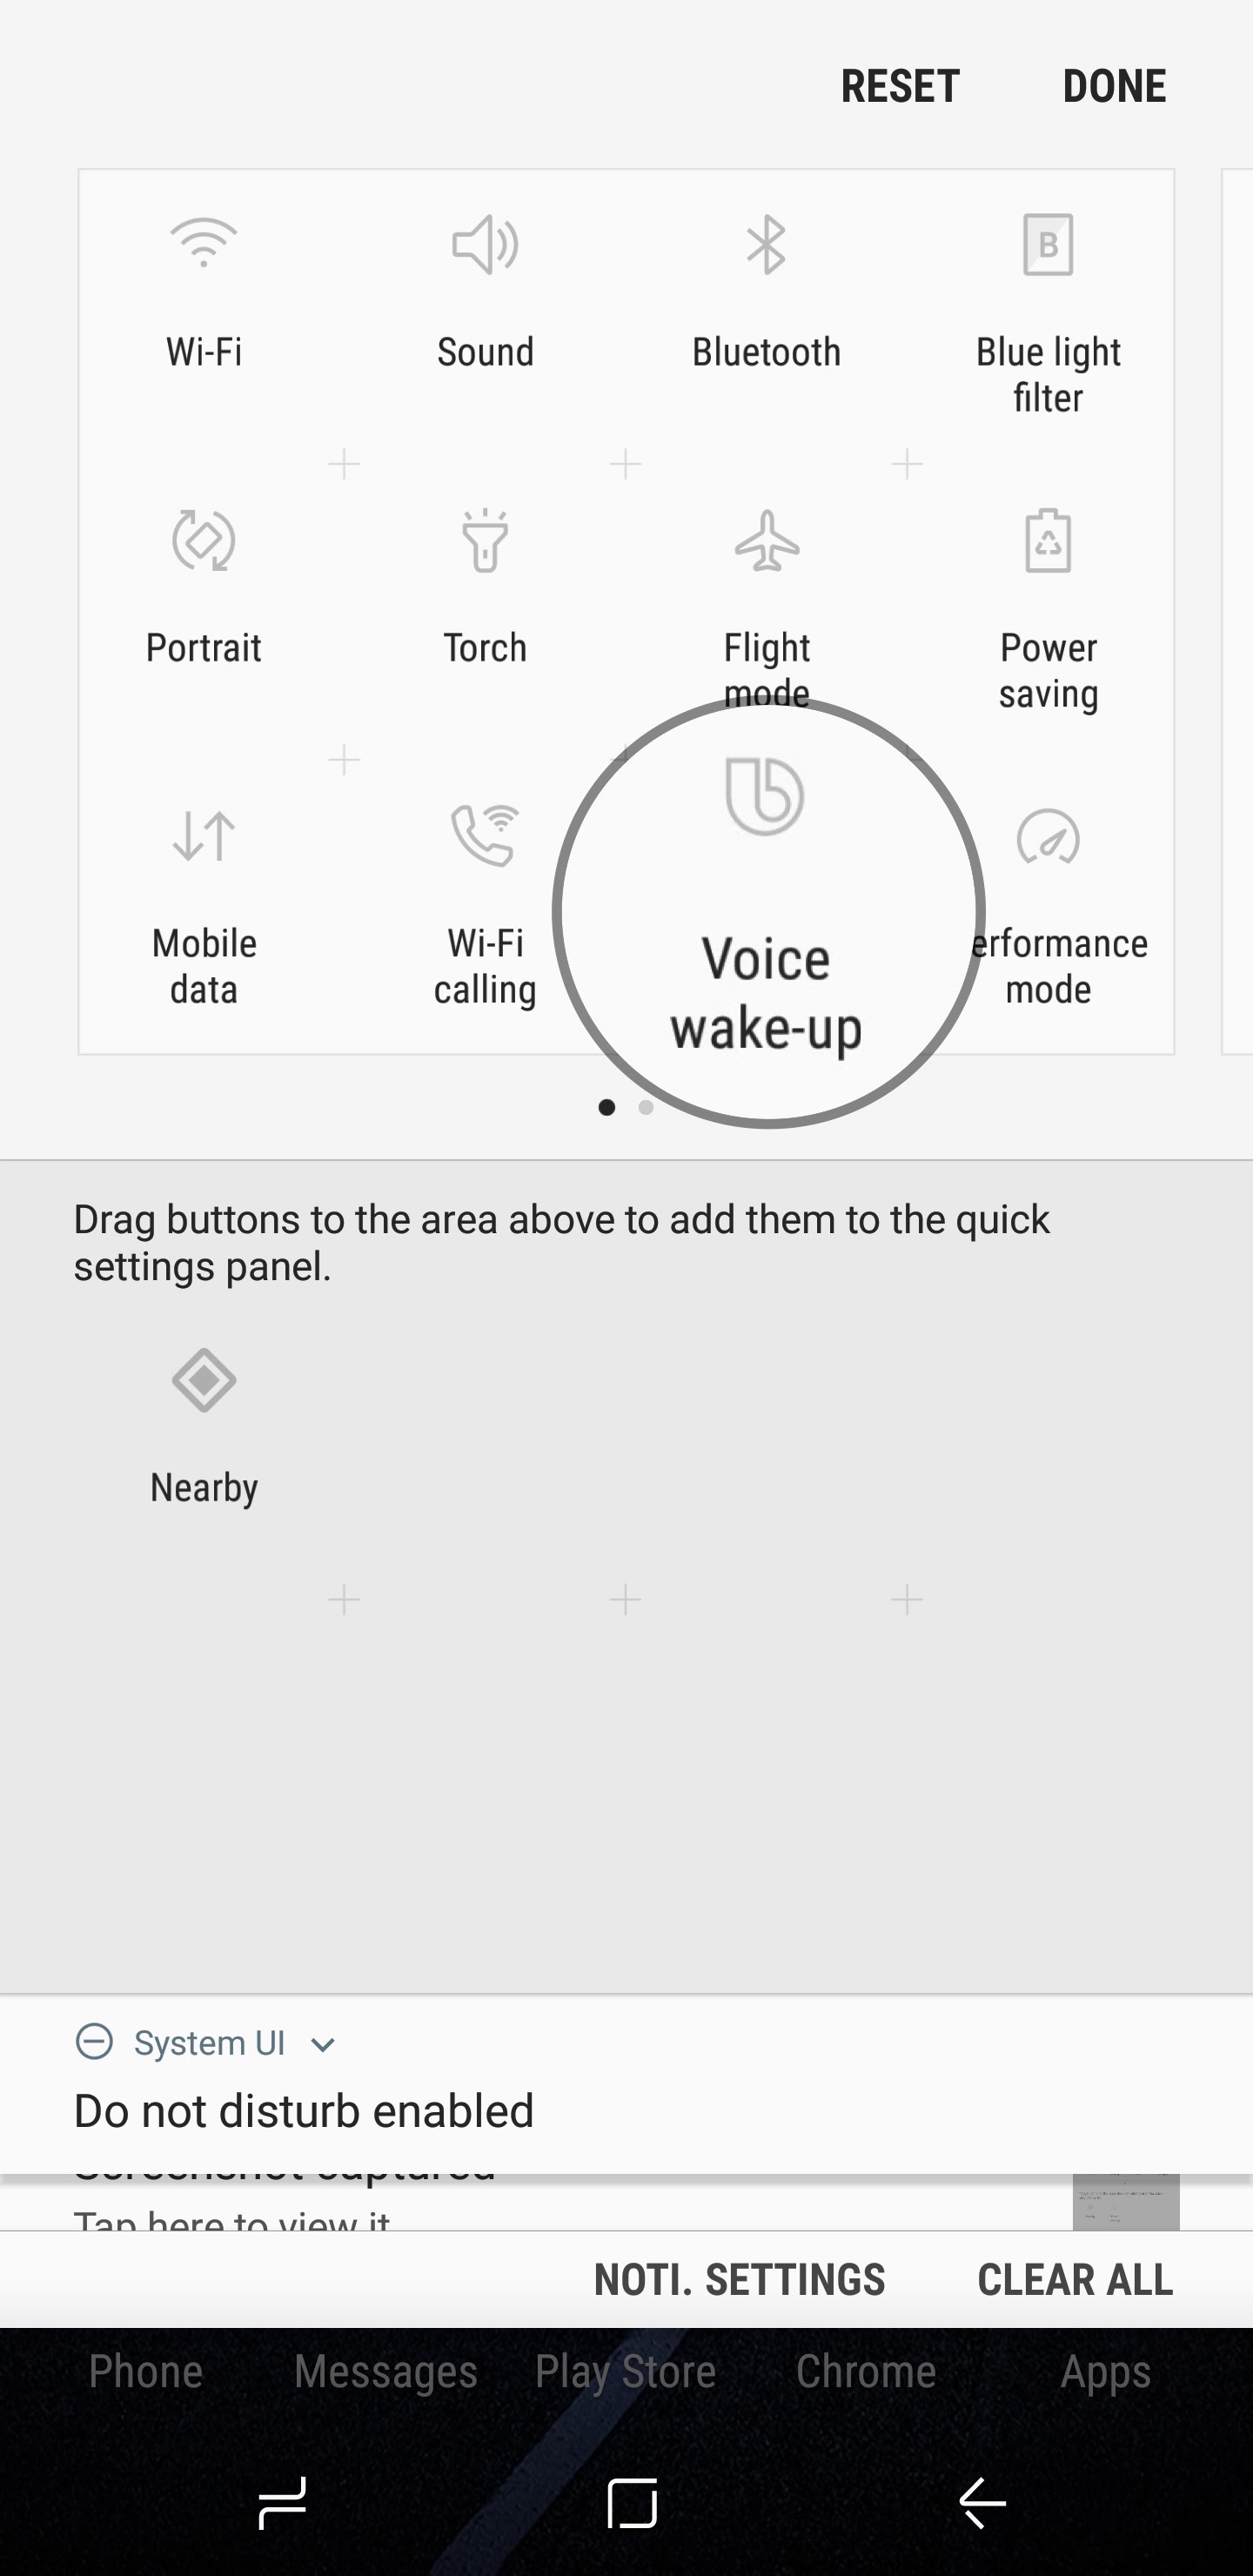 Bixby Tip: Enable or disable Bixby’s voice wake-up feature with its quick toggle